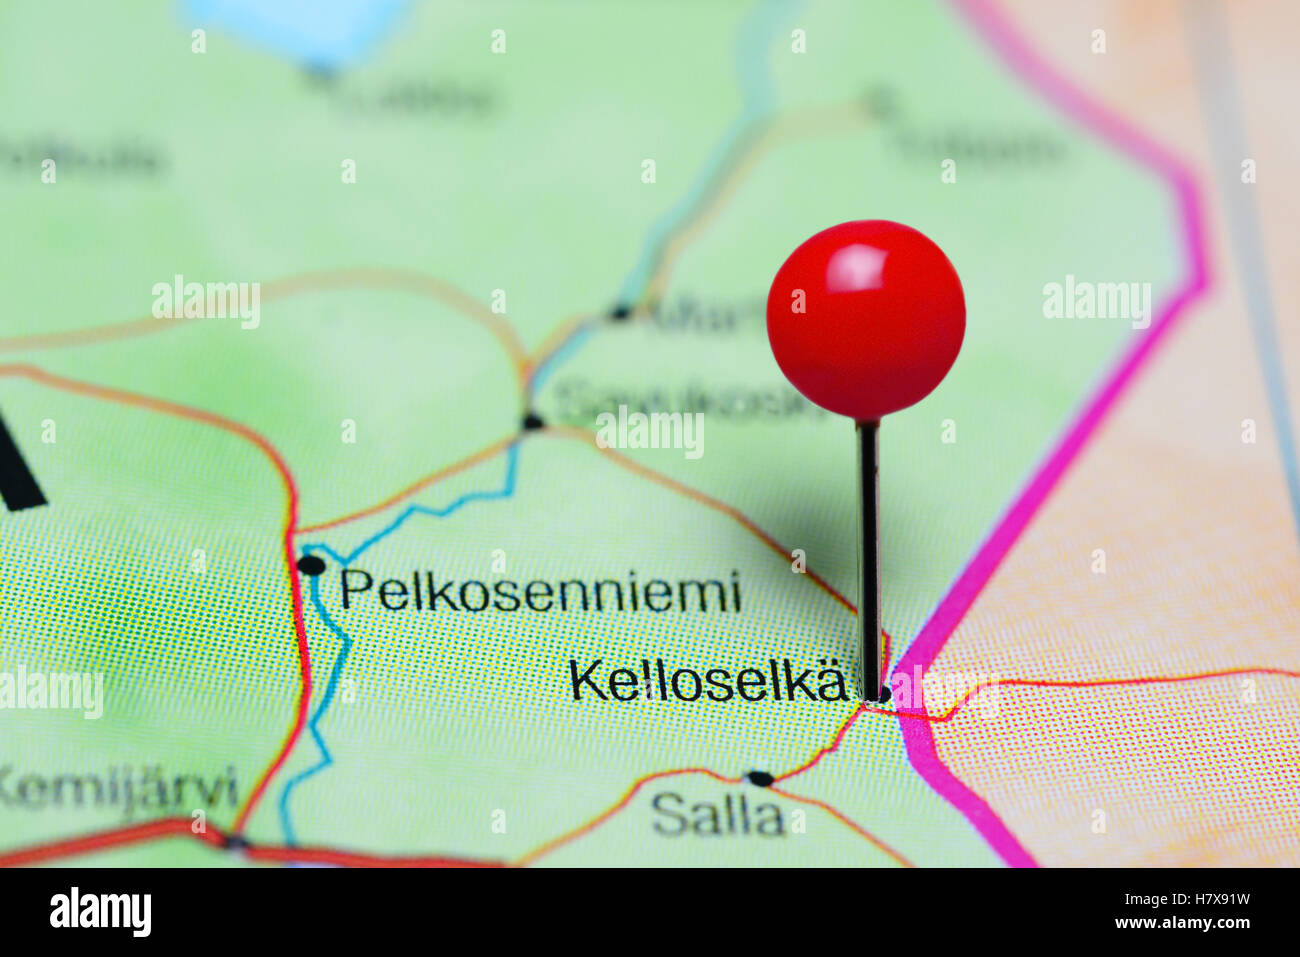 Kelloselka pinned on a map of Finland Stock Photo